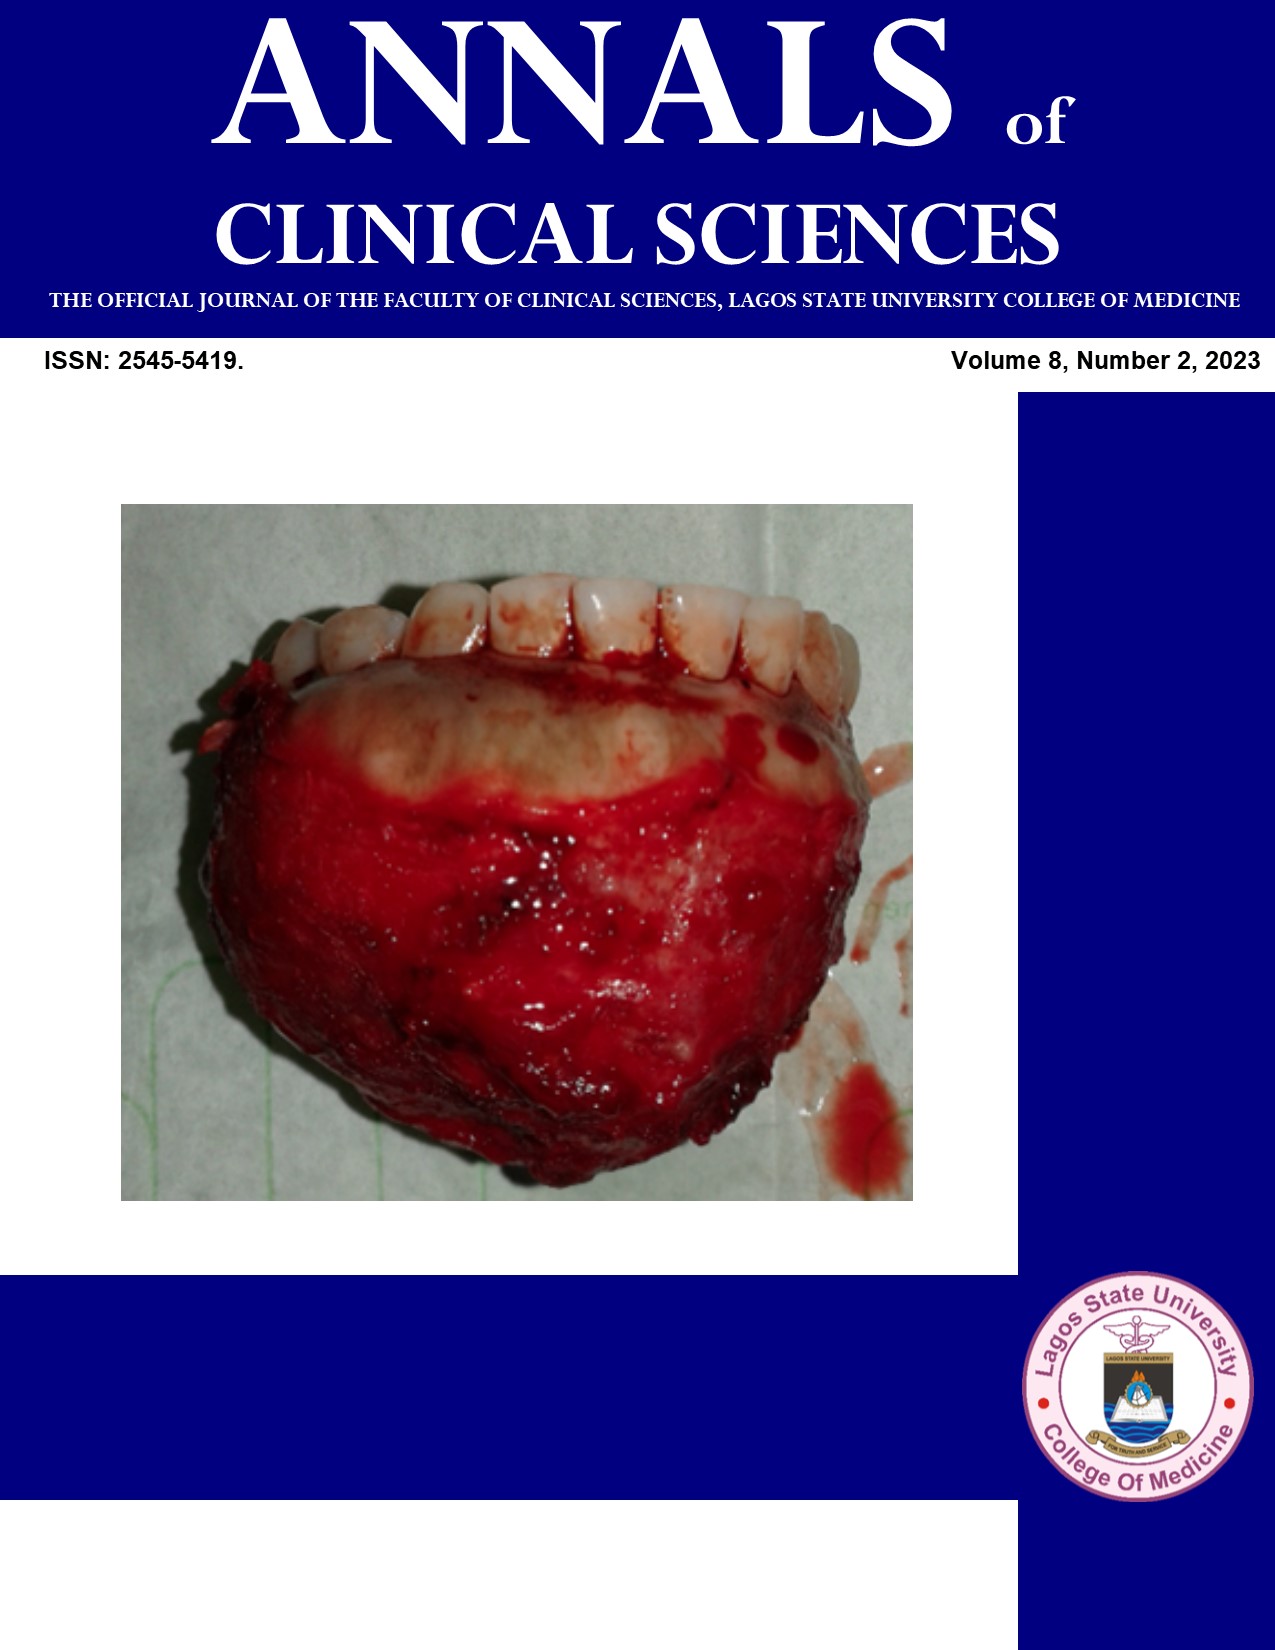 					View Vol. 8 No. 2 (2023): Annals of Clinical Sciences
				